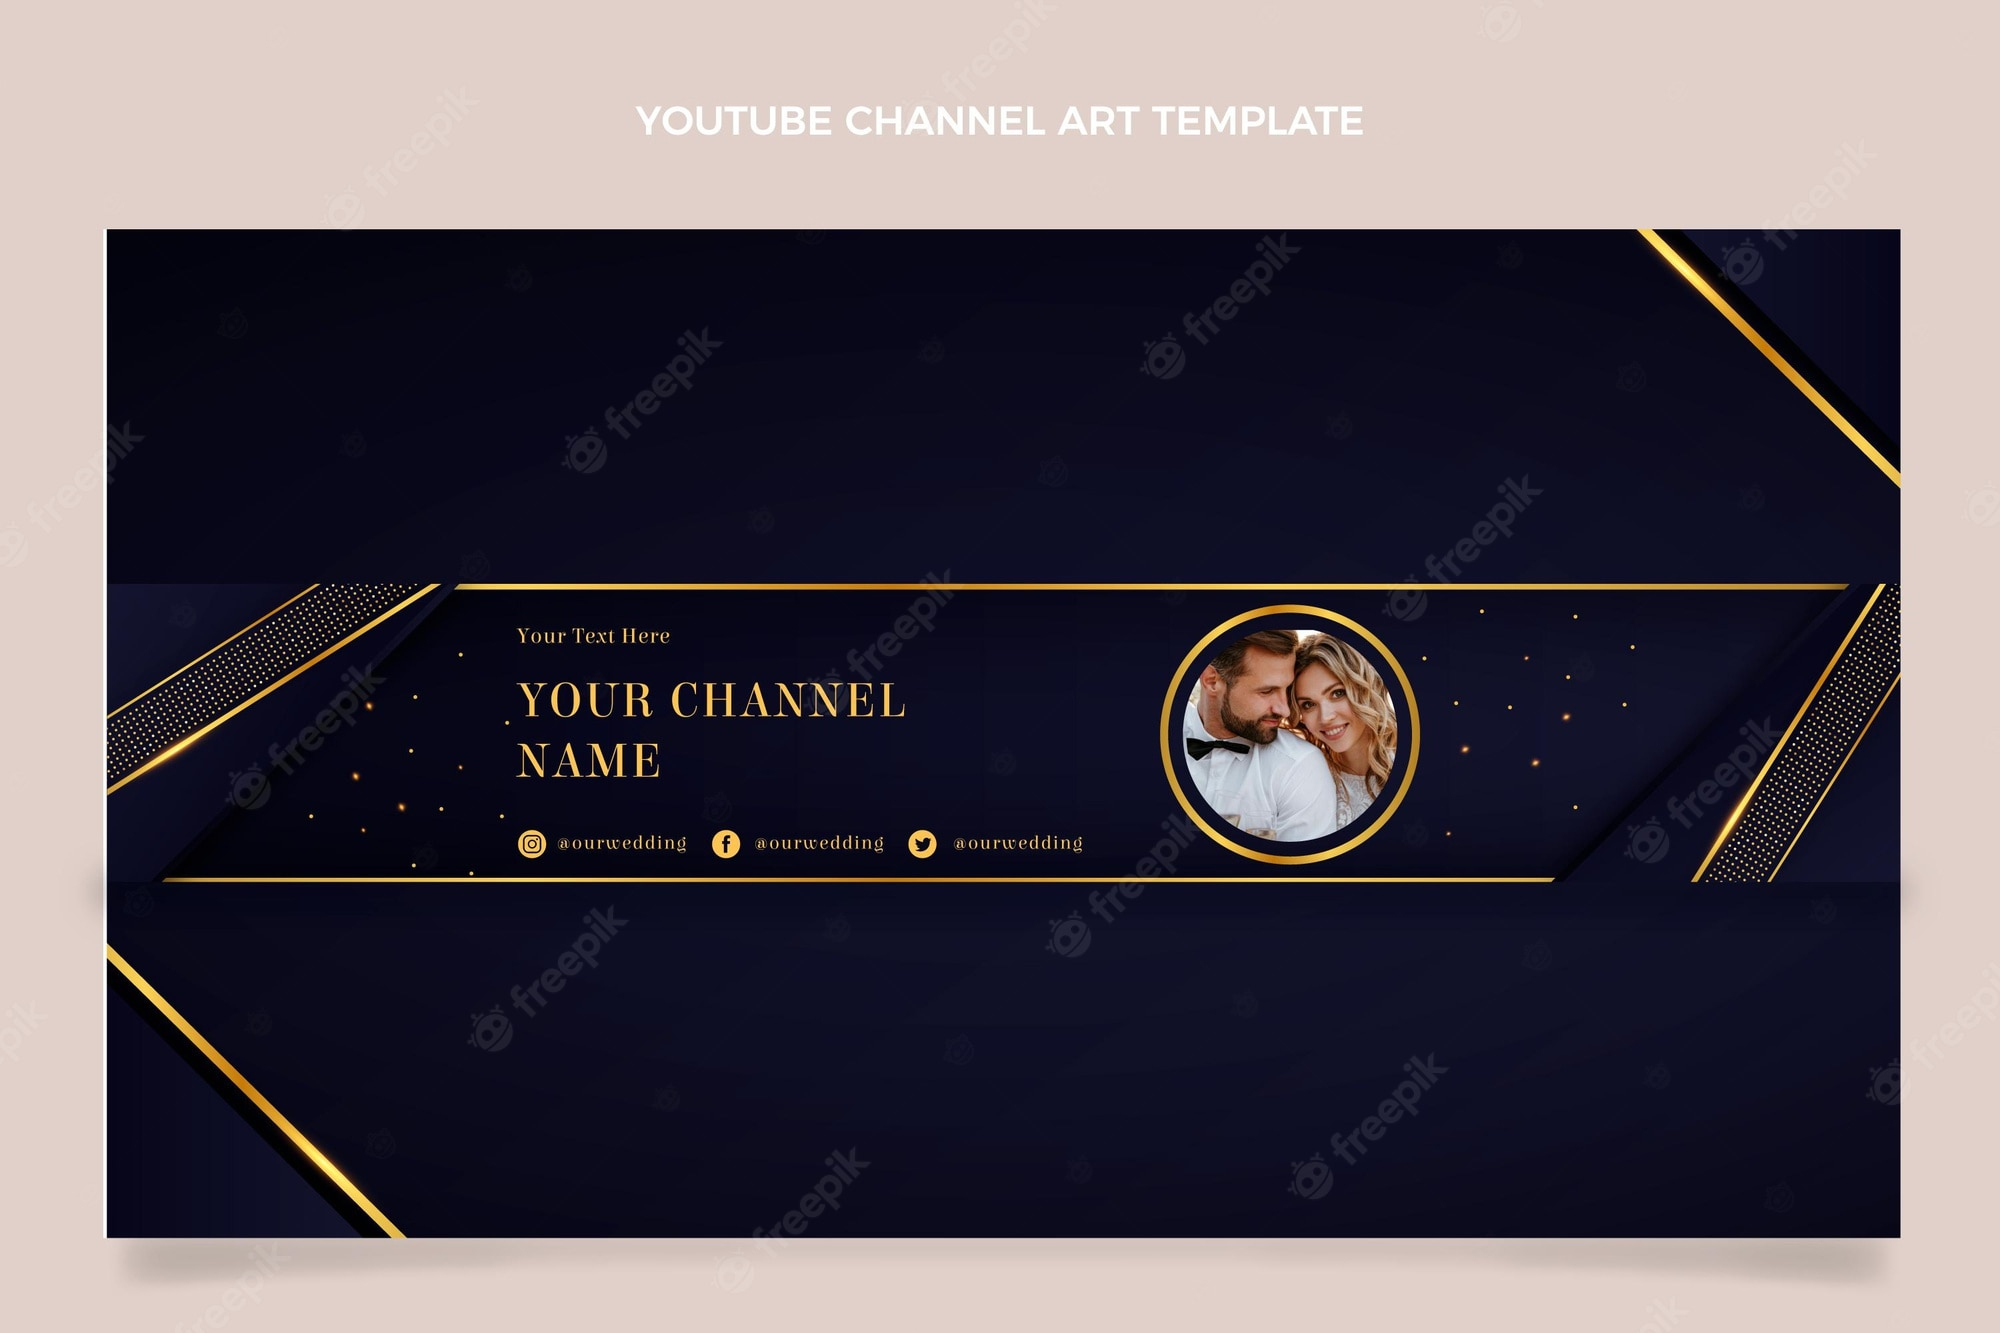 Youtube channel banner template - Free Vectors & PSD Download Intended For Yt Banner Template